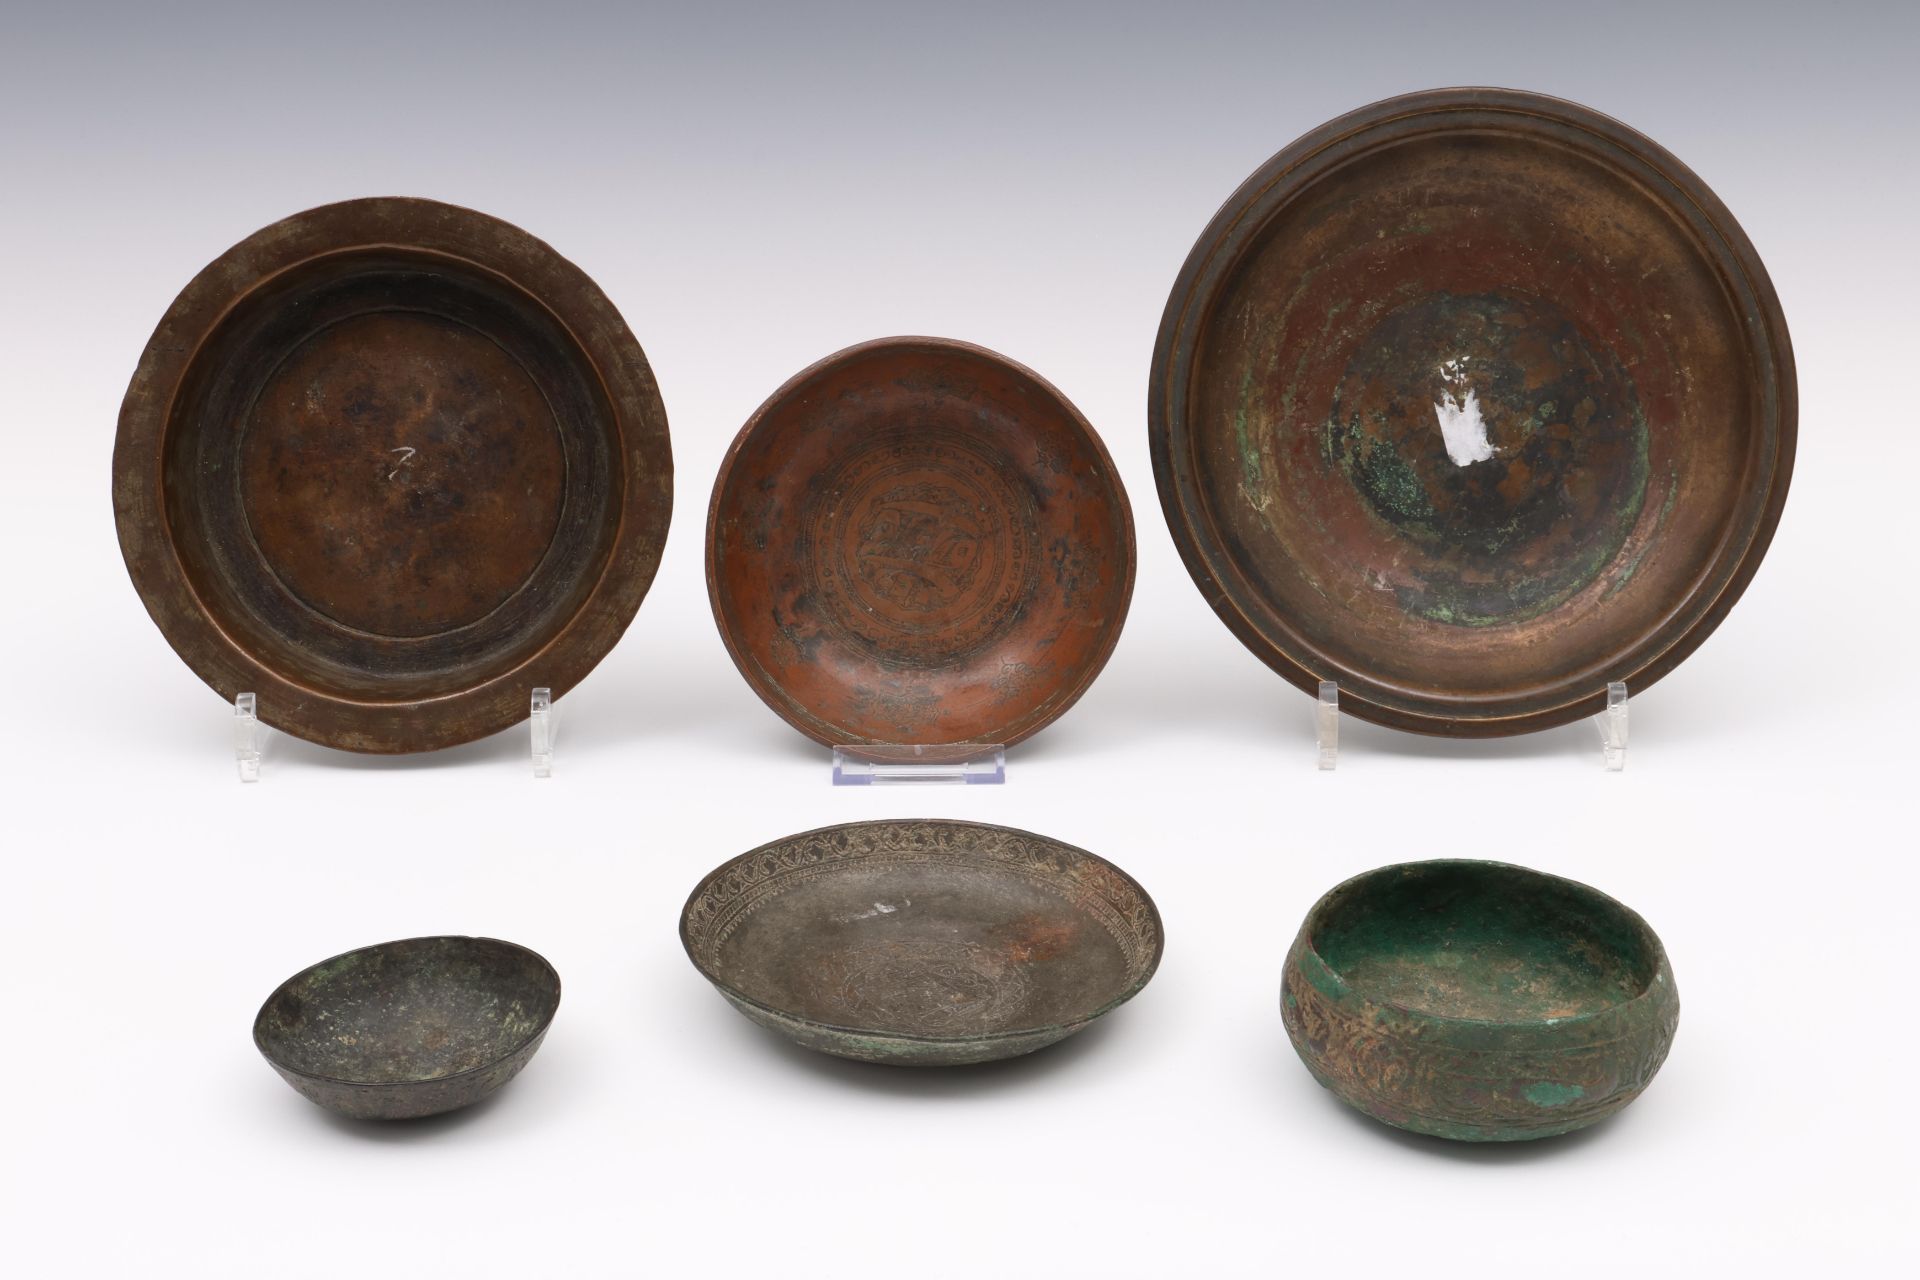 Six Persian and Ottoman bronze bowls, 11th - 17th century;